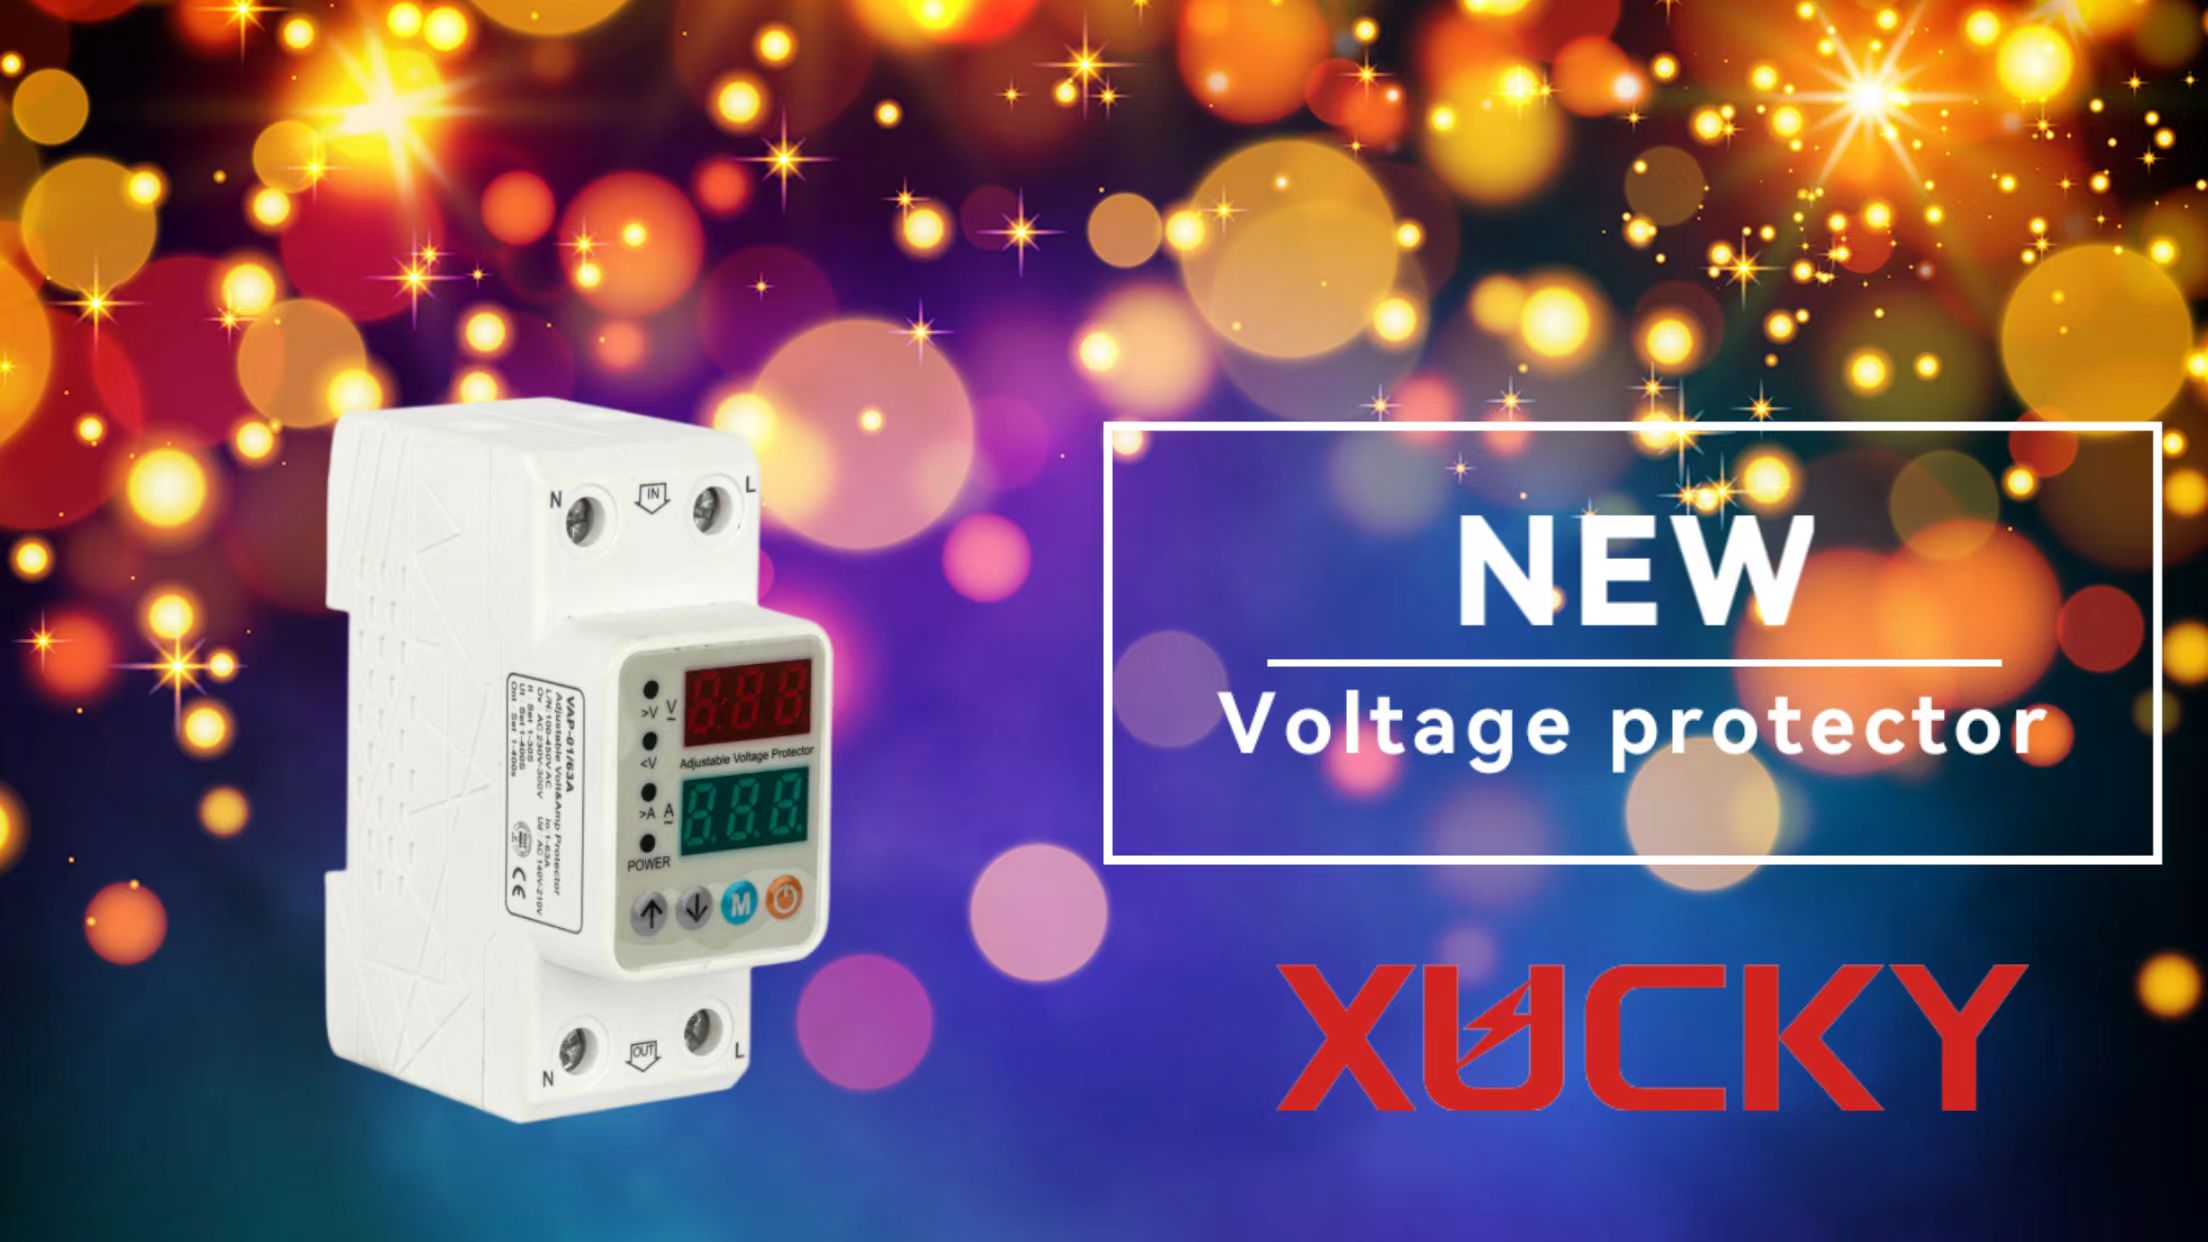 Xucky Introduces Revolutionary Auto Voltage Protector for Enhanced Electrical Safety